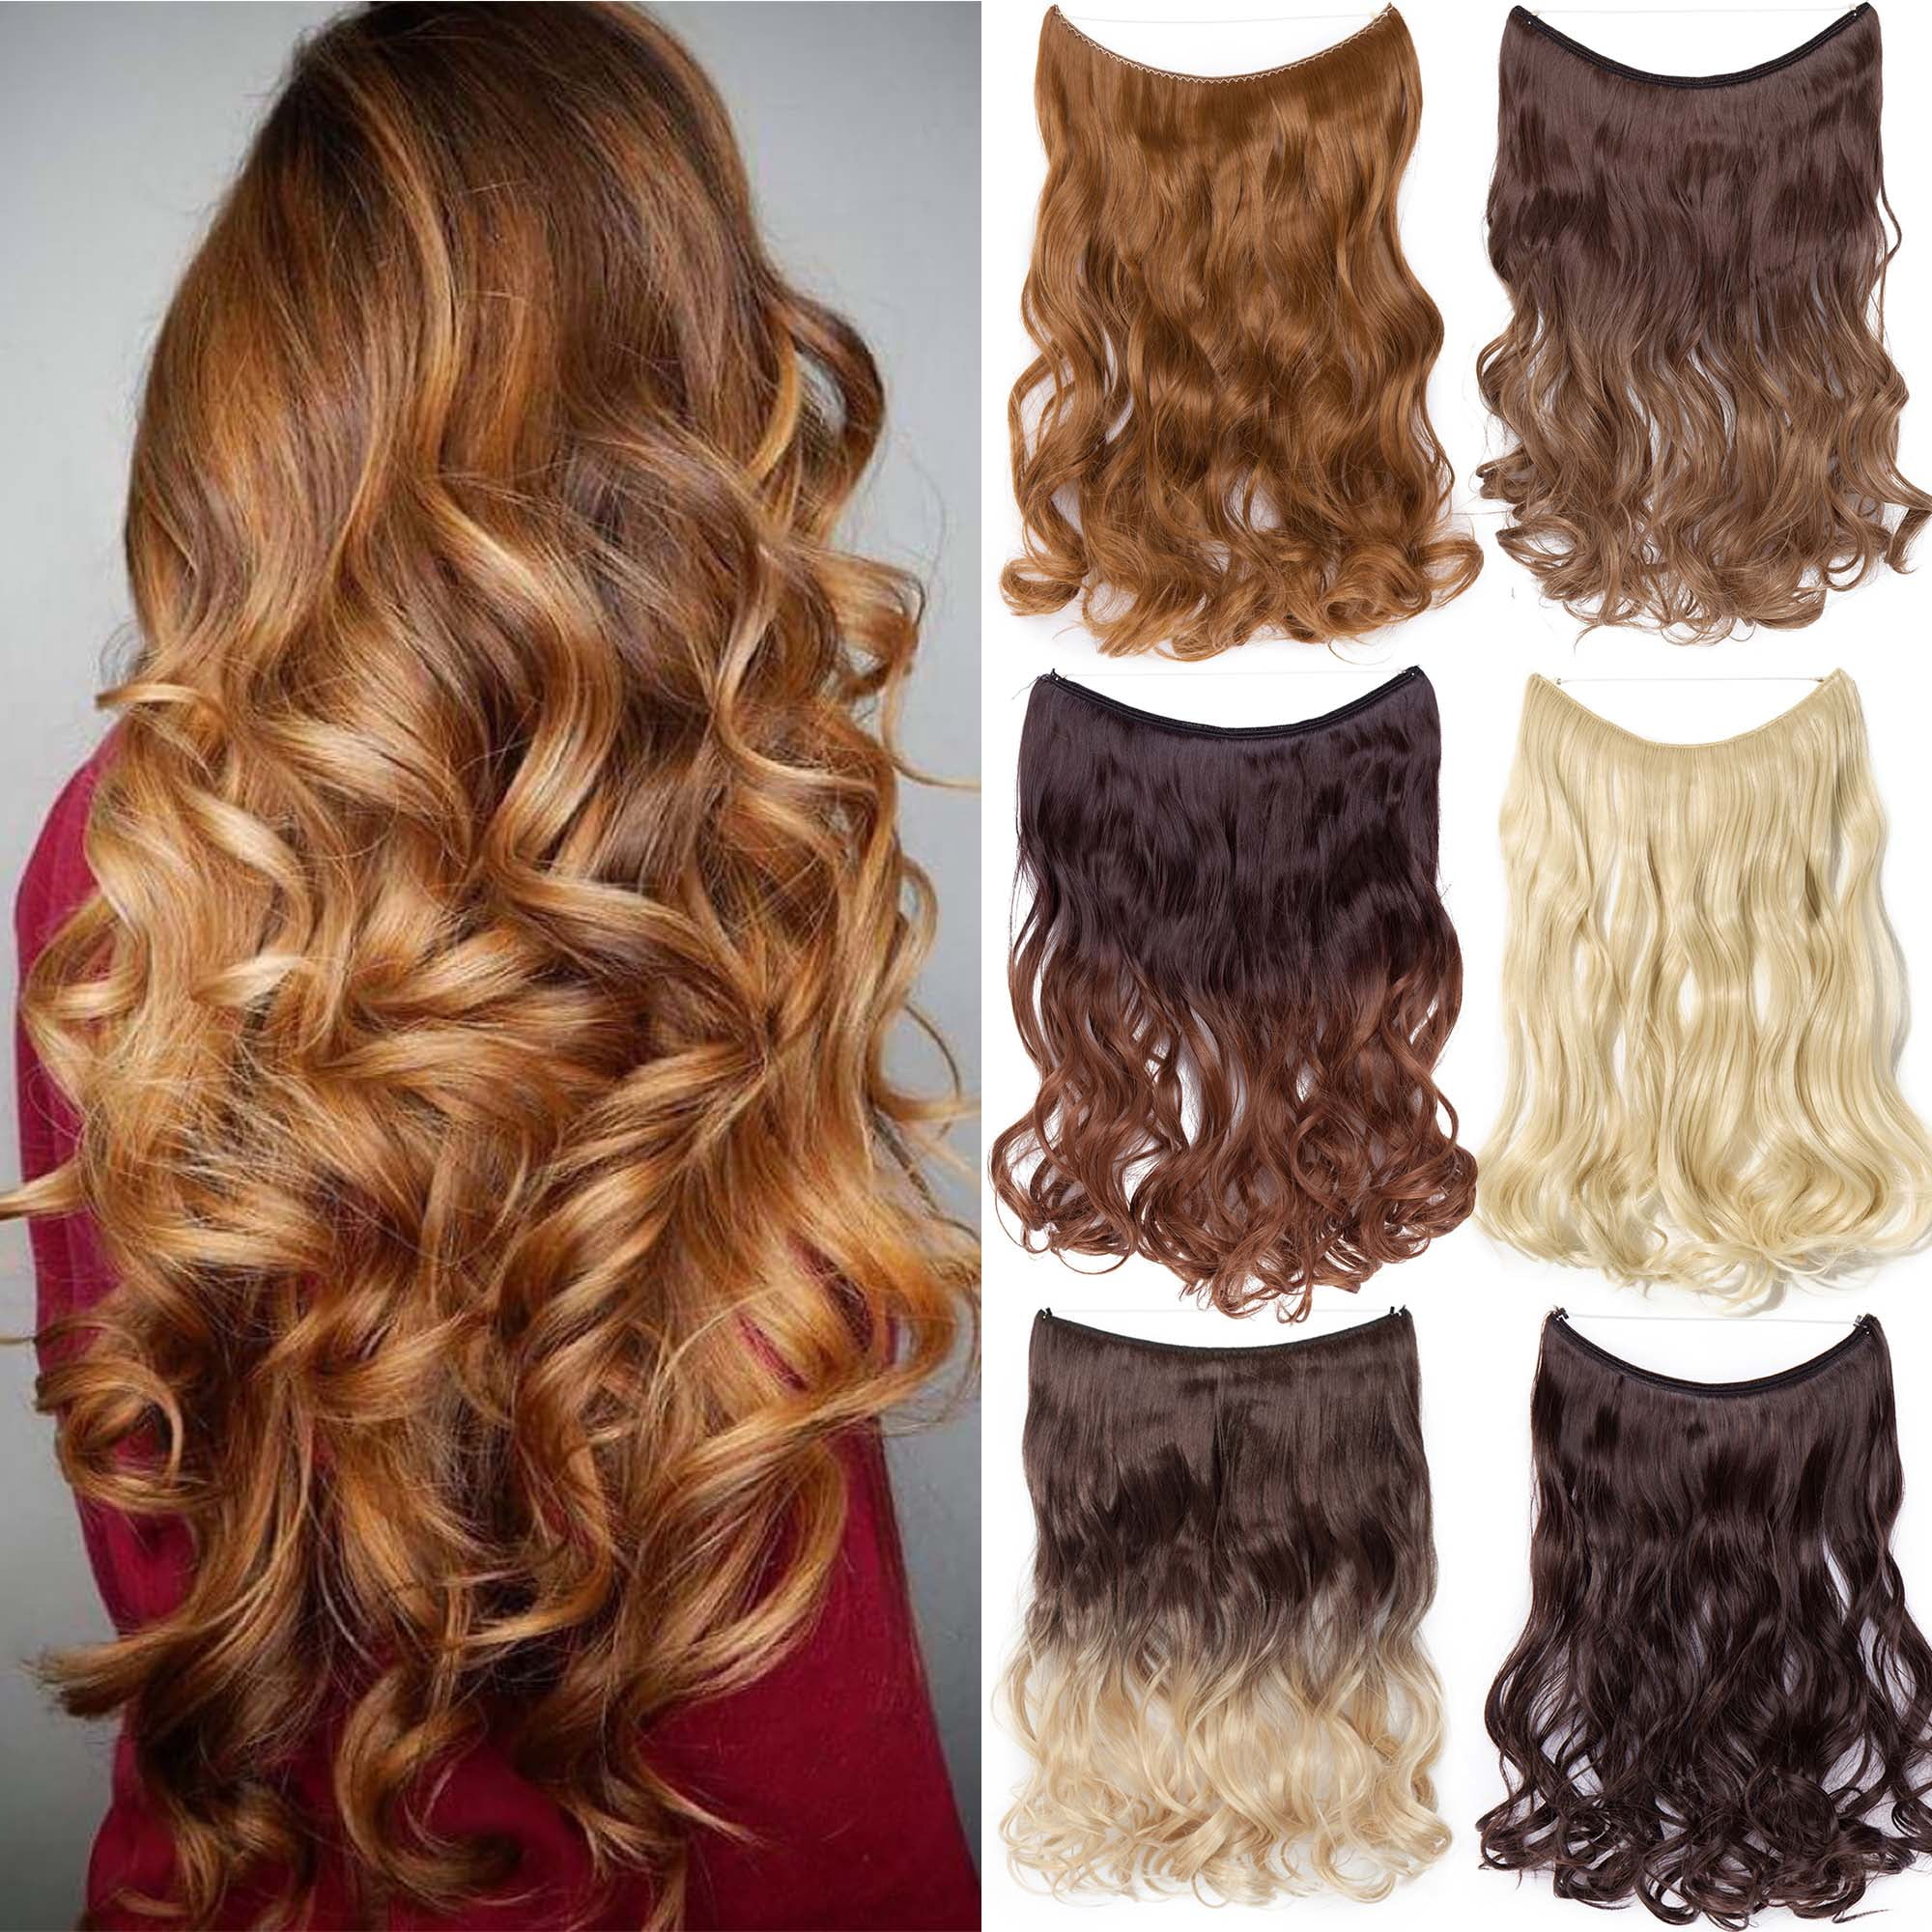 S Noilite Invisible Wire No Clips In Hair Extensions Miracle Secret Fish Line Hairpieces Silky Straight Synthetic Hair Light Brown Ombre Sandy Blonde 20 90g Walmart Com - black ombre hair extensions roblox